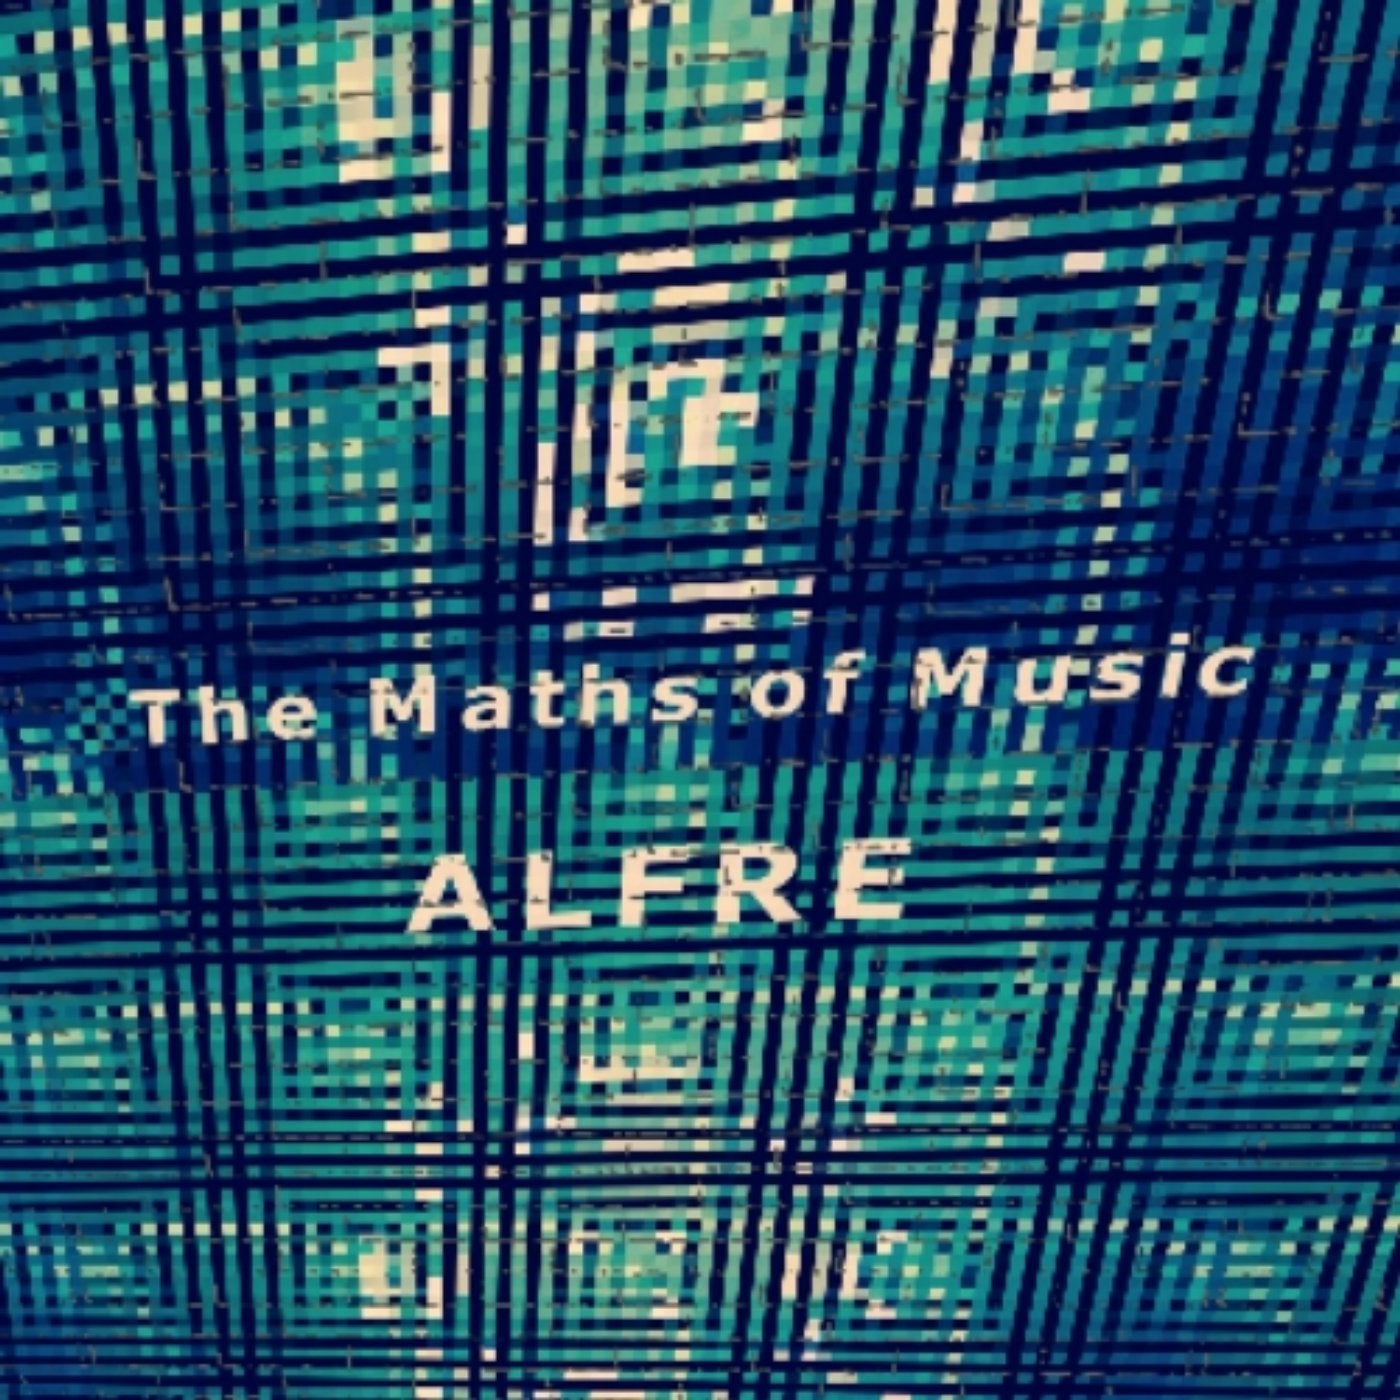 The Maths of Music